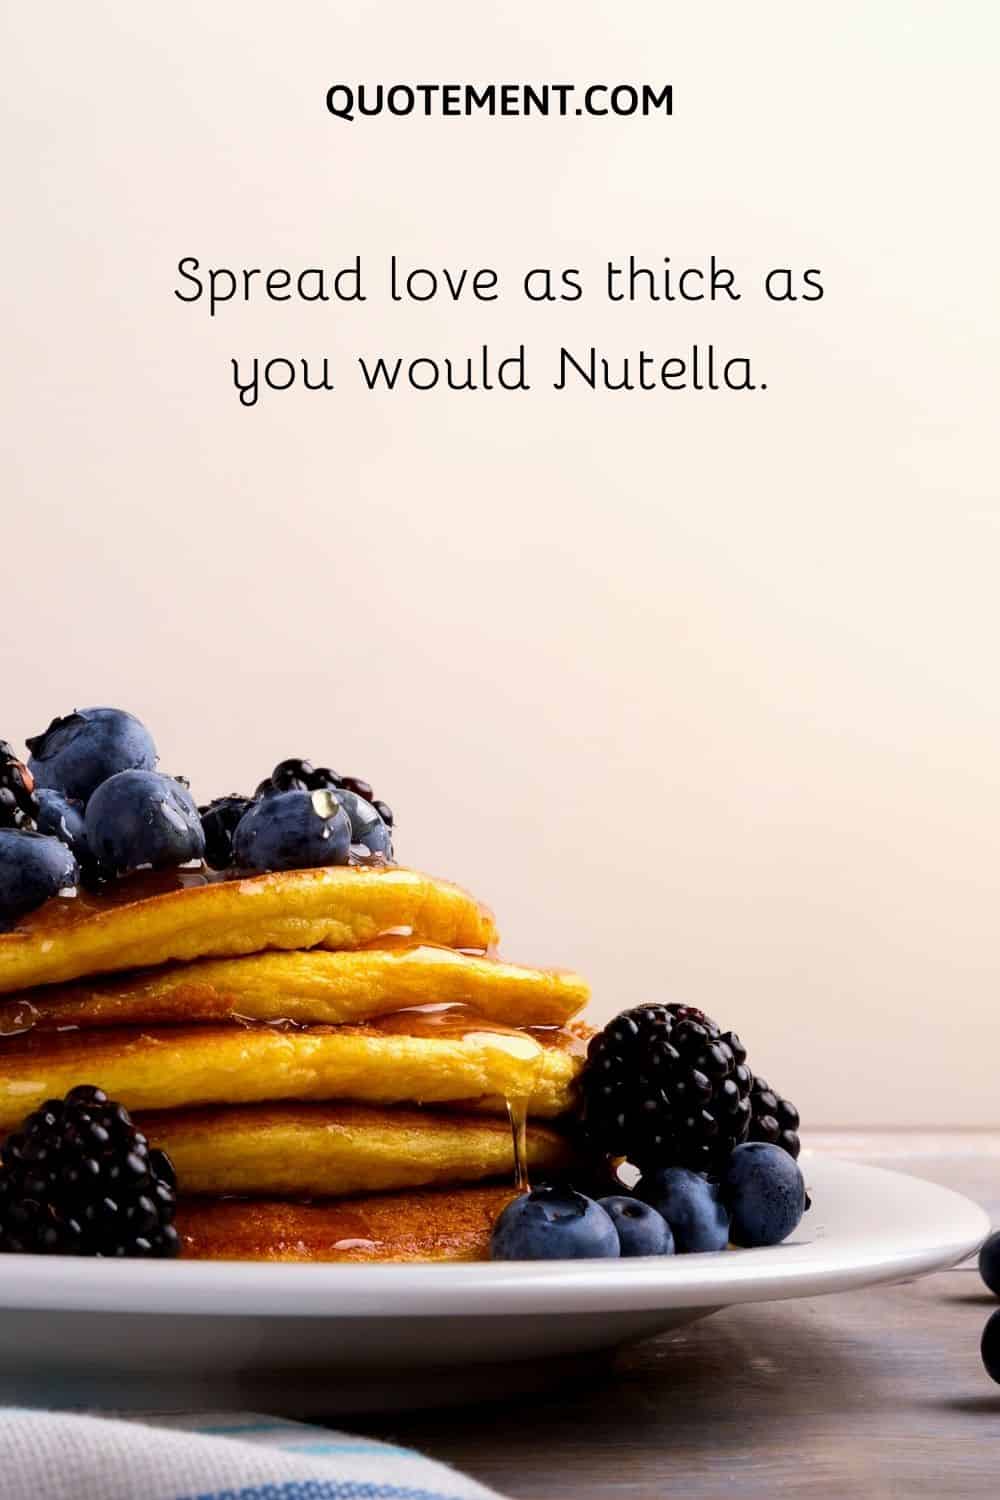 Spread love as thick as you would Nutella